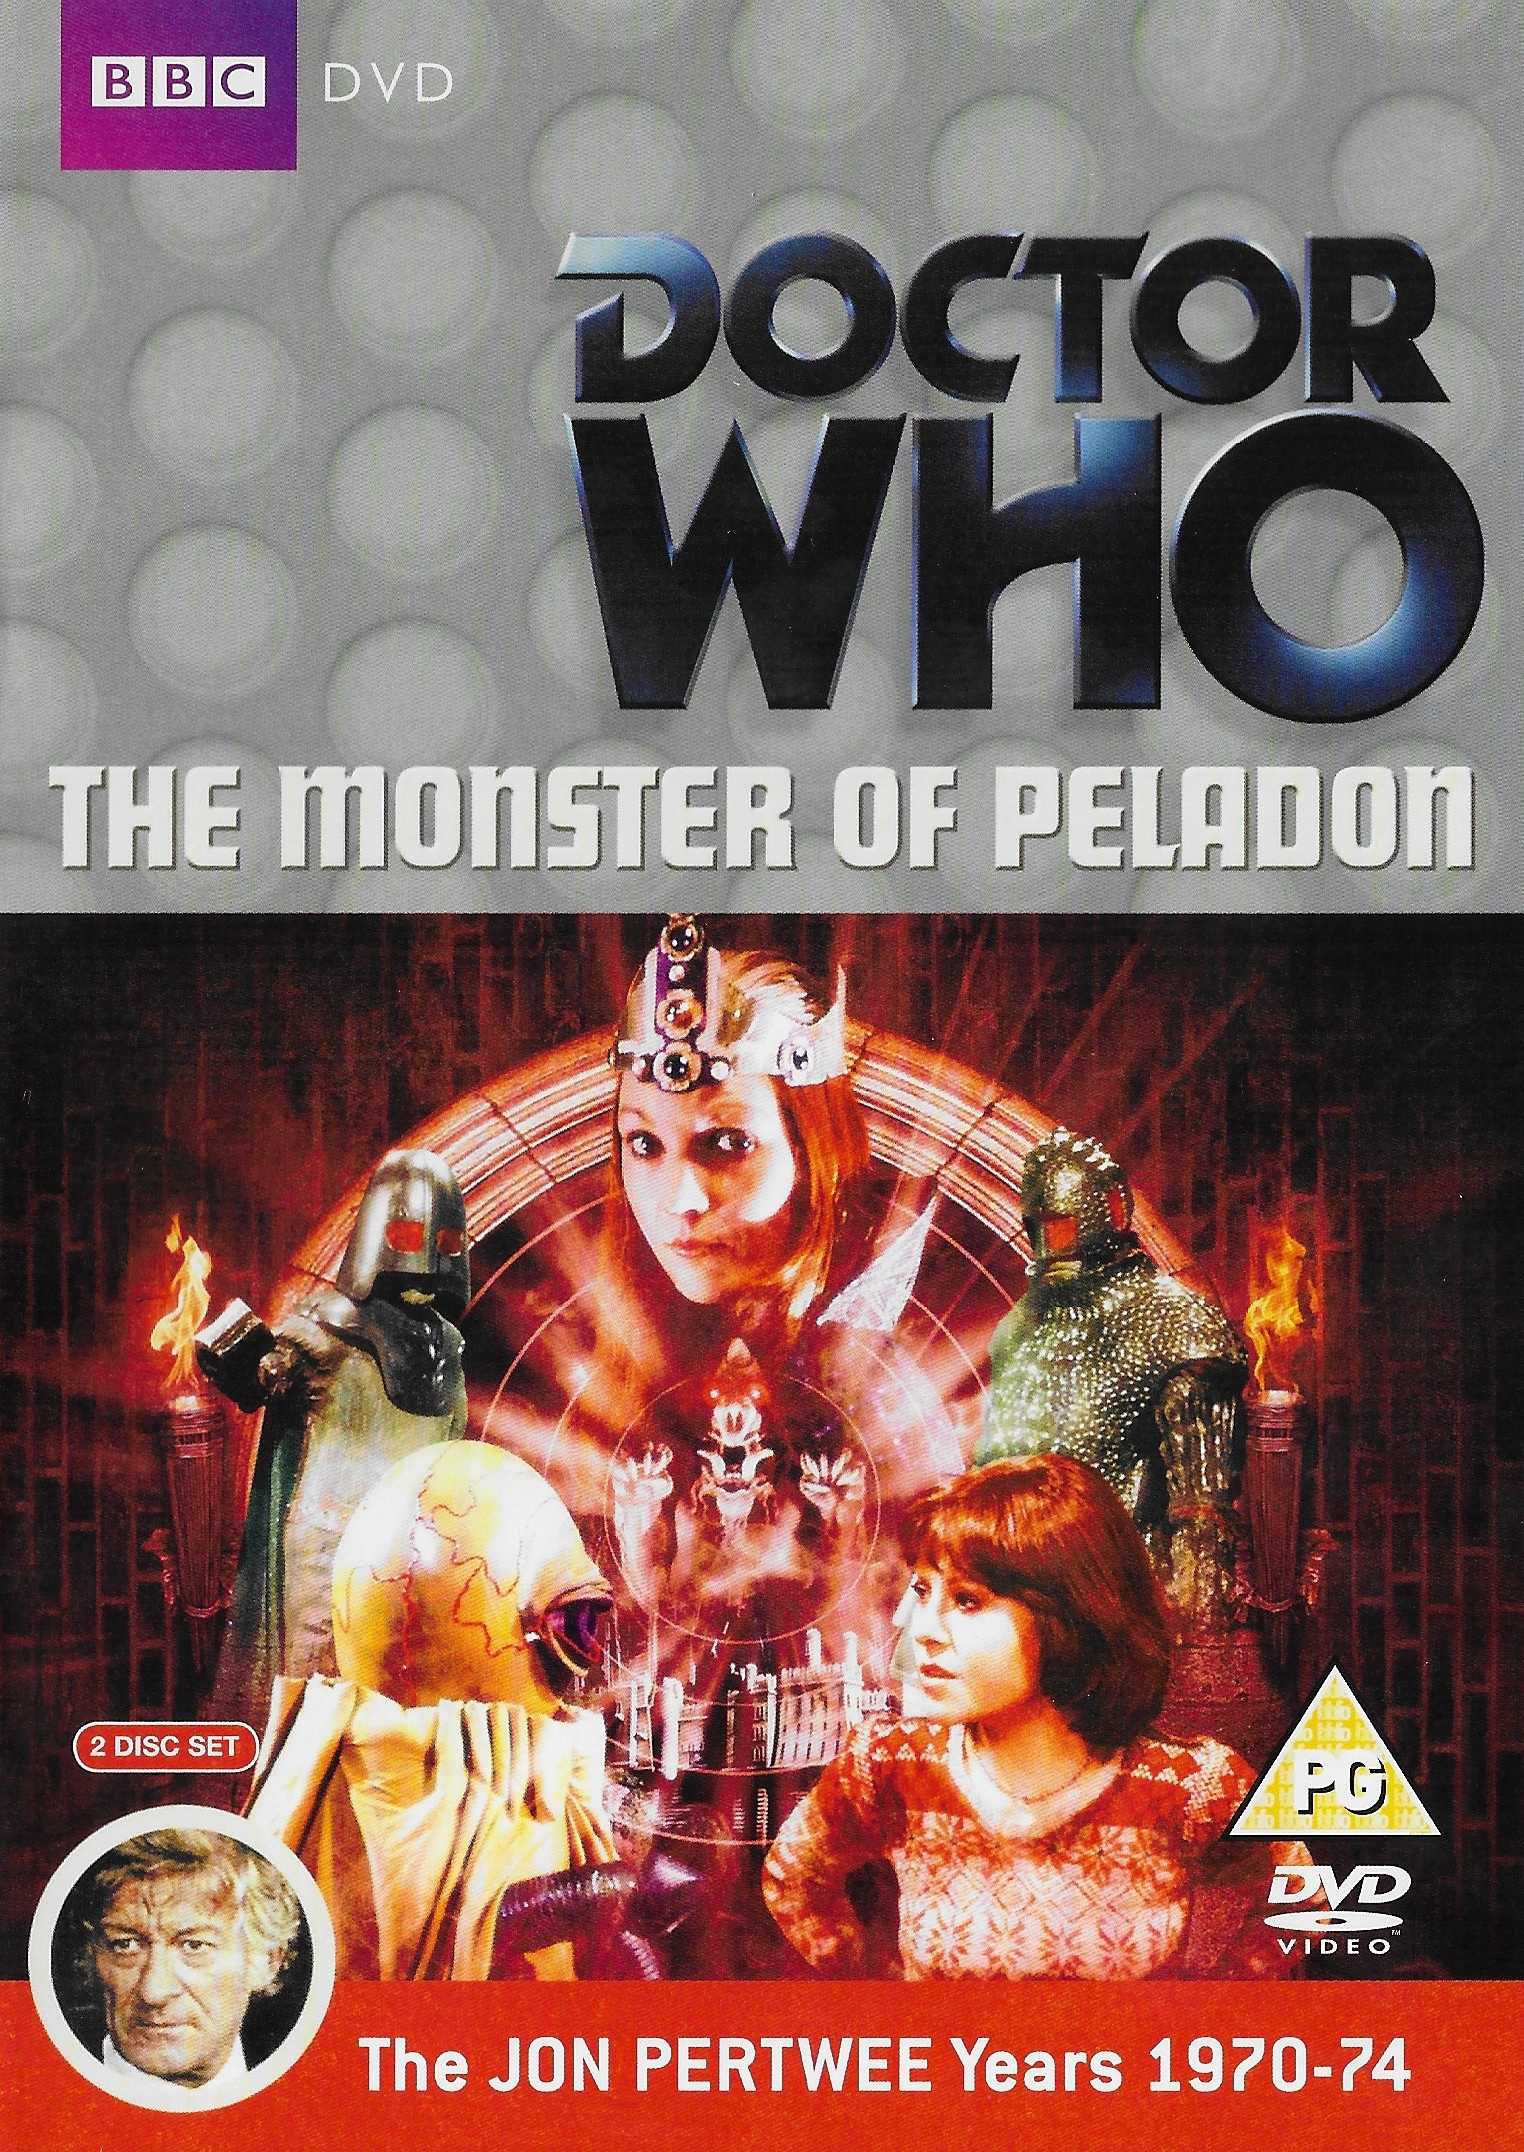 Picture of BBCDVD 2744B Doctor Who - The Monster of Peladon by artist Brian Hayles from the BBC dvds - Records and Tapes library